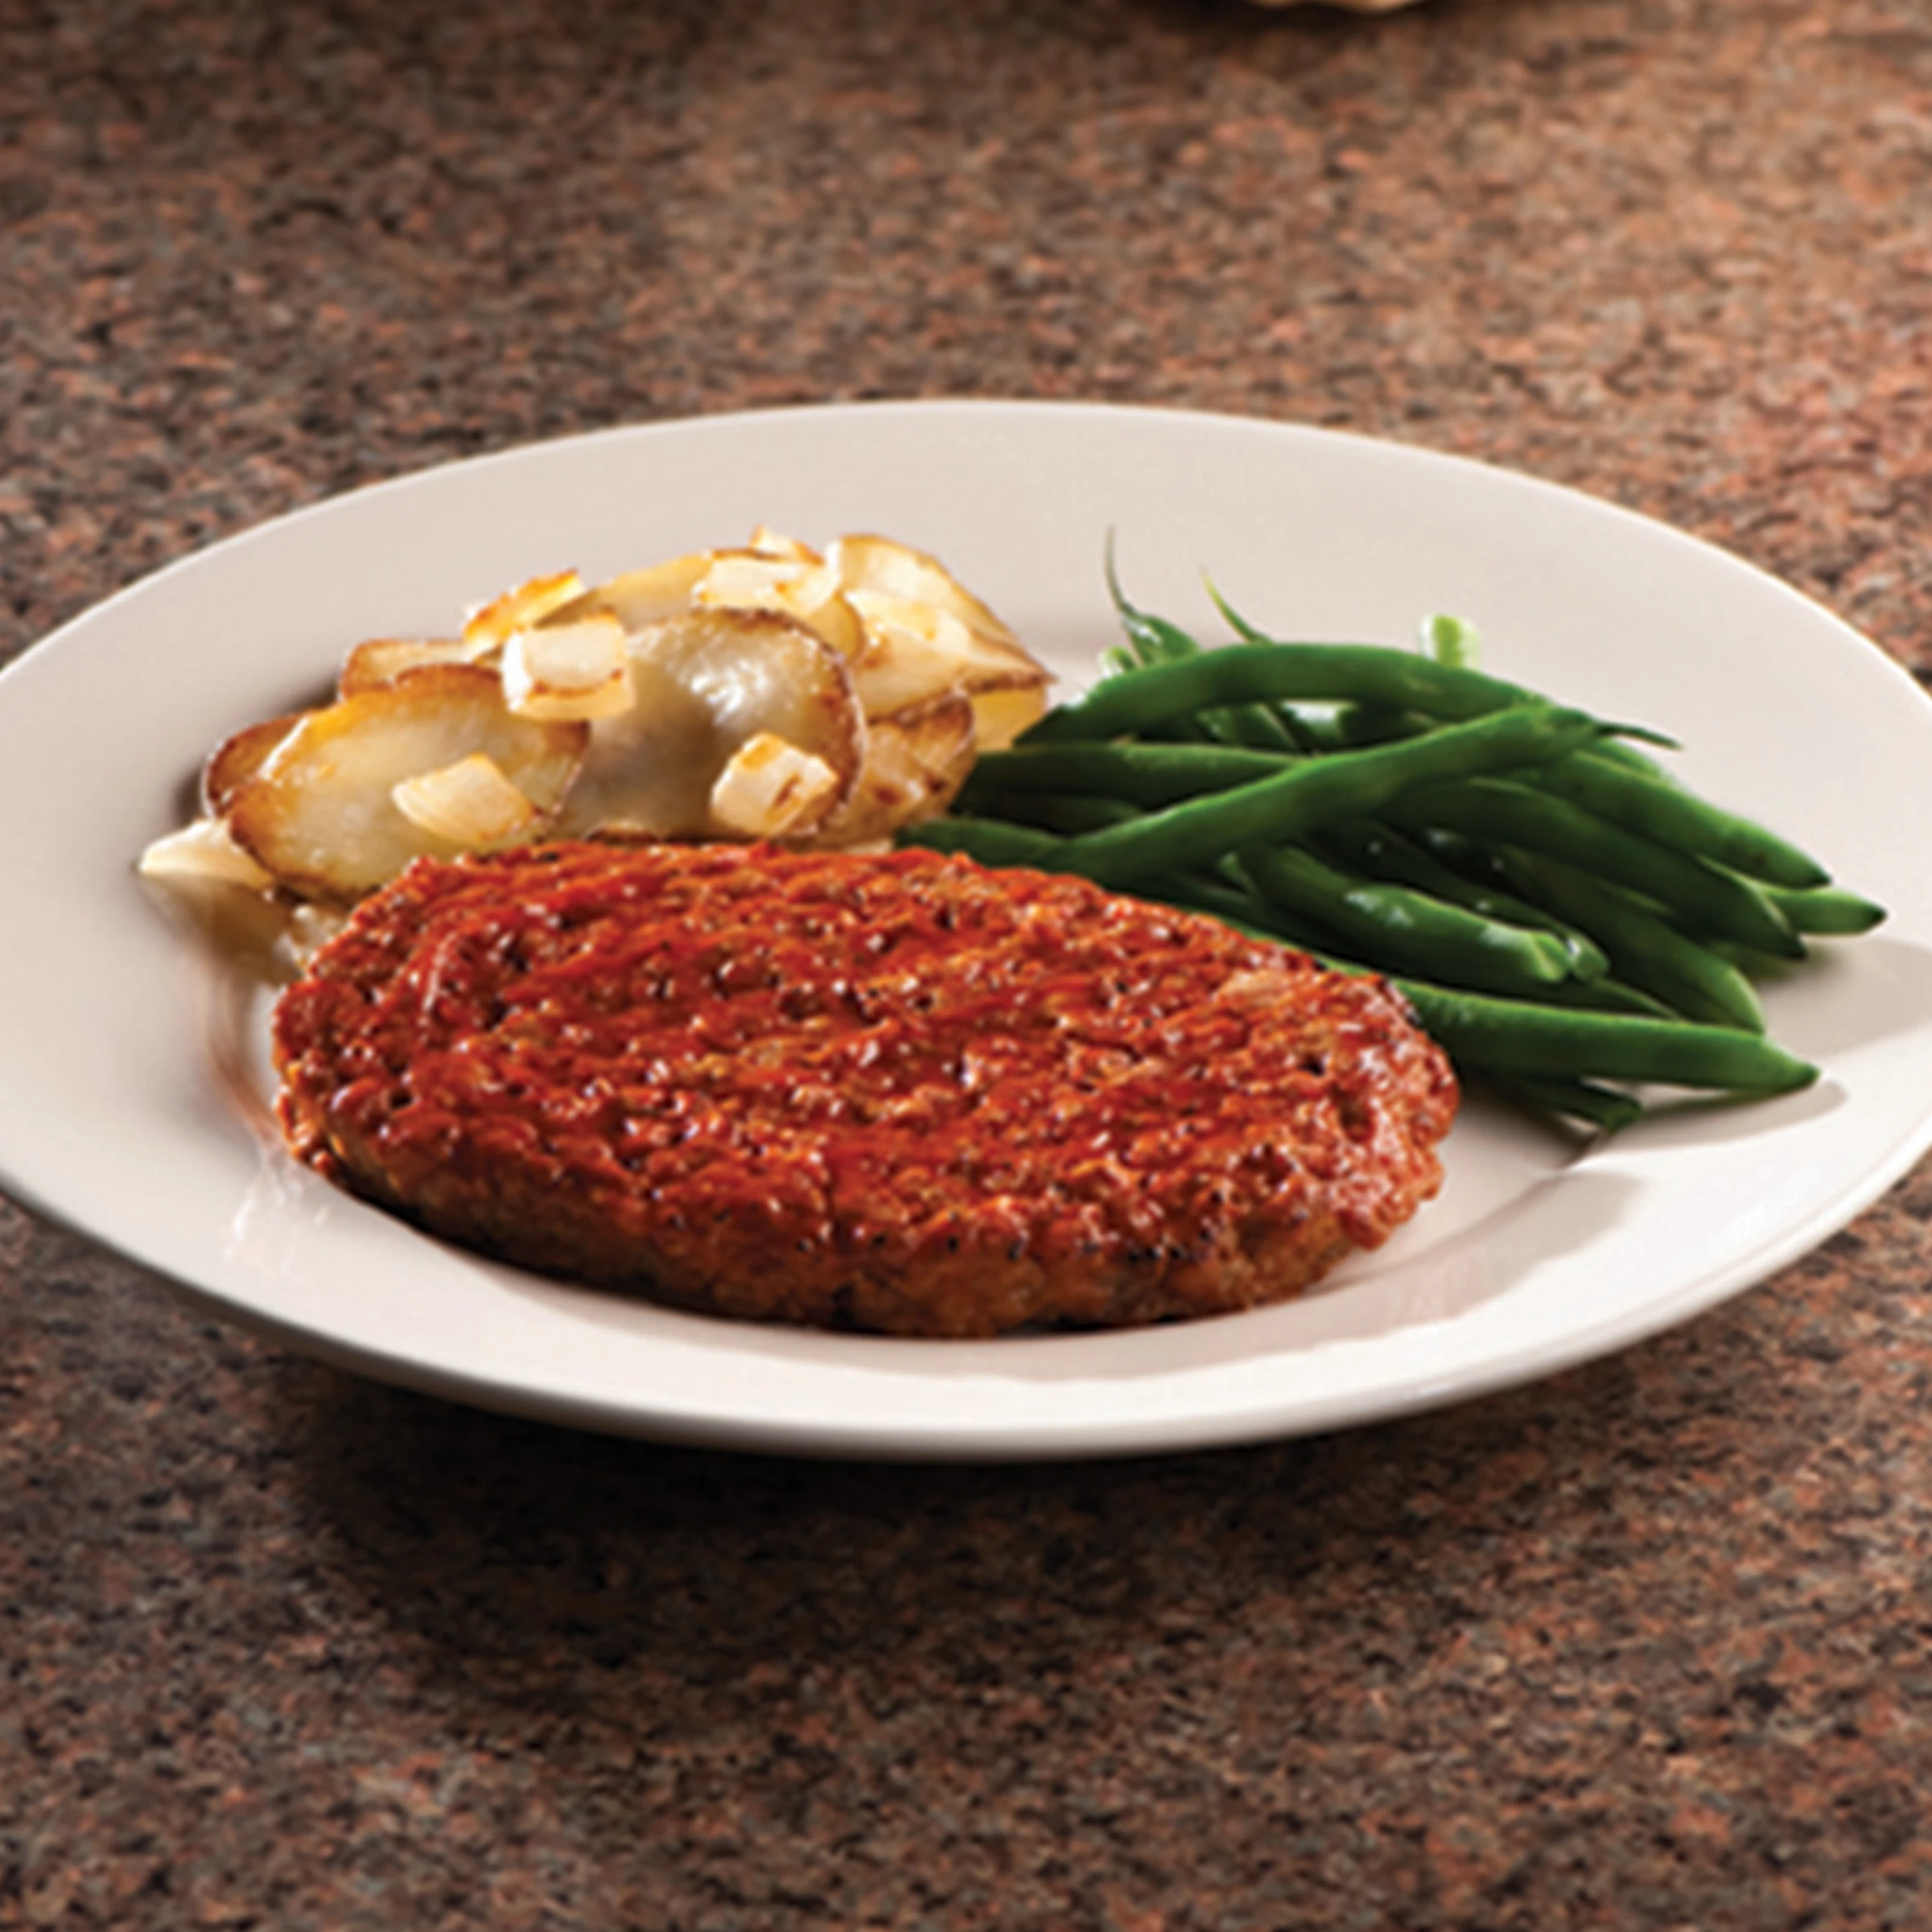 AdvancePierre® Fully Cooked Glazed with Ketchup Beef with Onion, Bell Pepper and Spices Meatloaf Patty, 6 oz, Approx. 30 Pieces, 11.25 Lbshttp://images.salsify.com/image/upload/s--CX4F2JhV--/qviyoqzszihhsta2bx41.webp